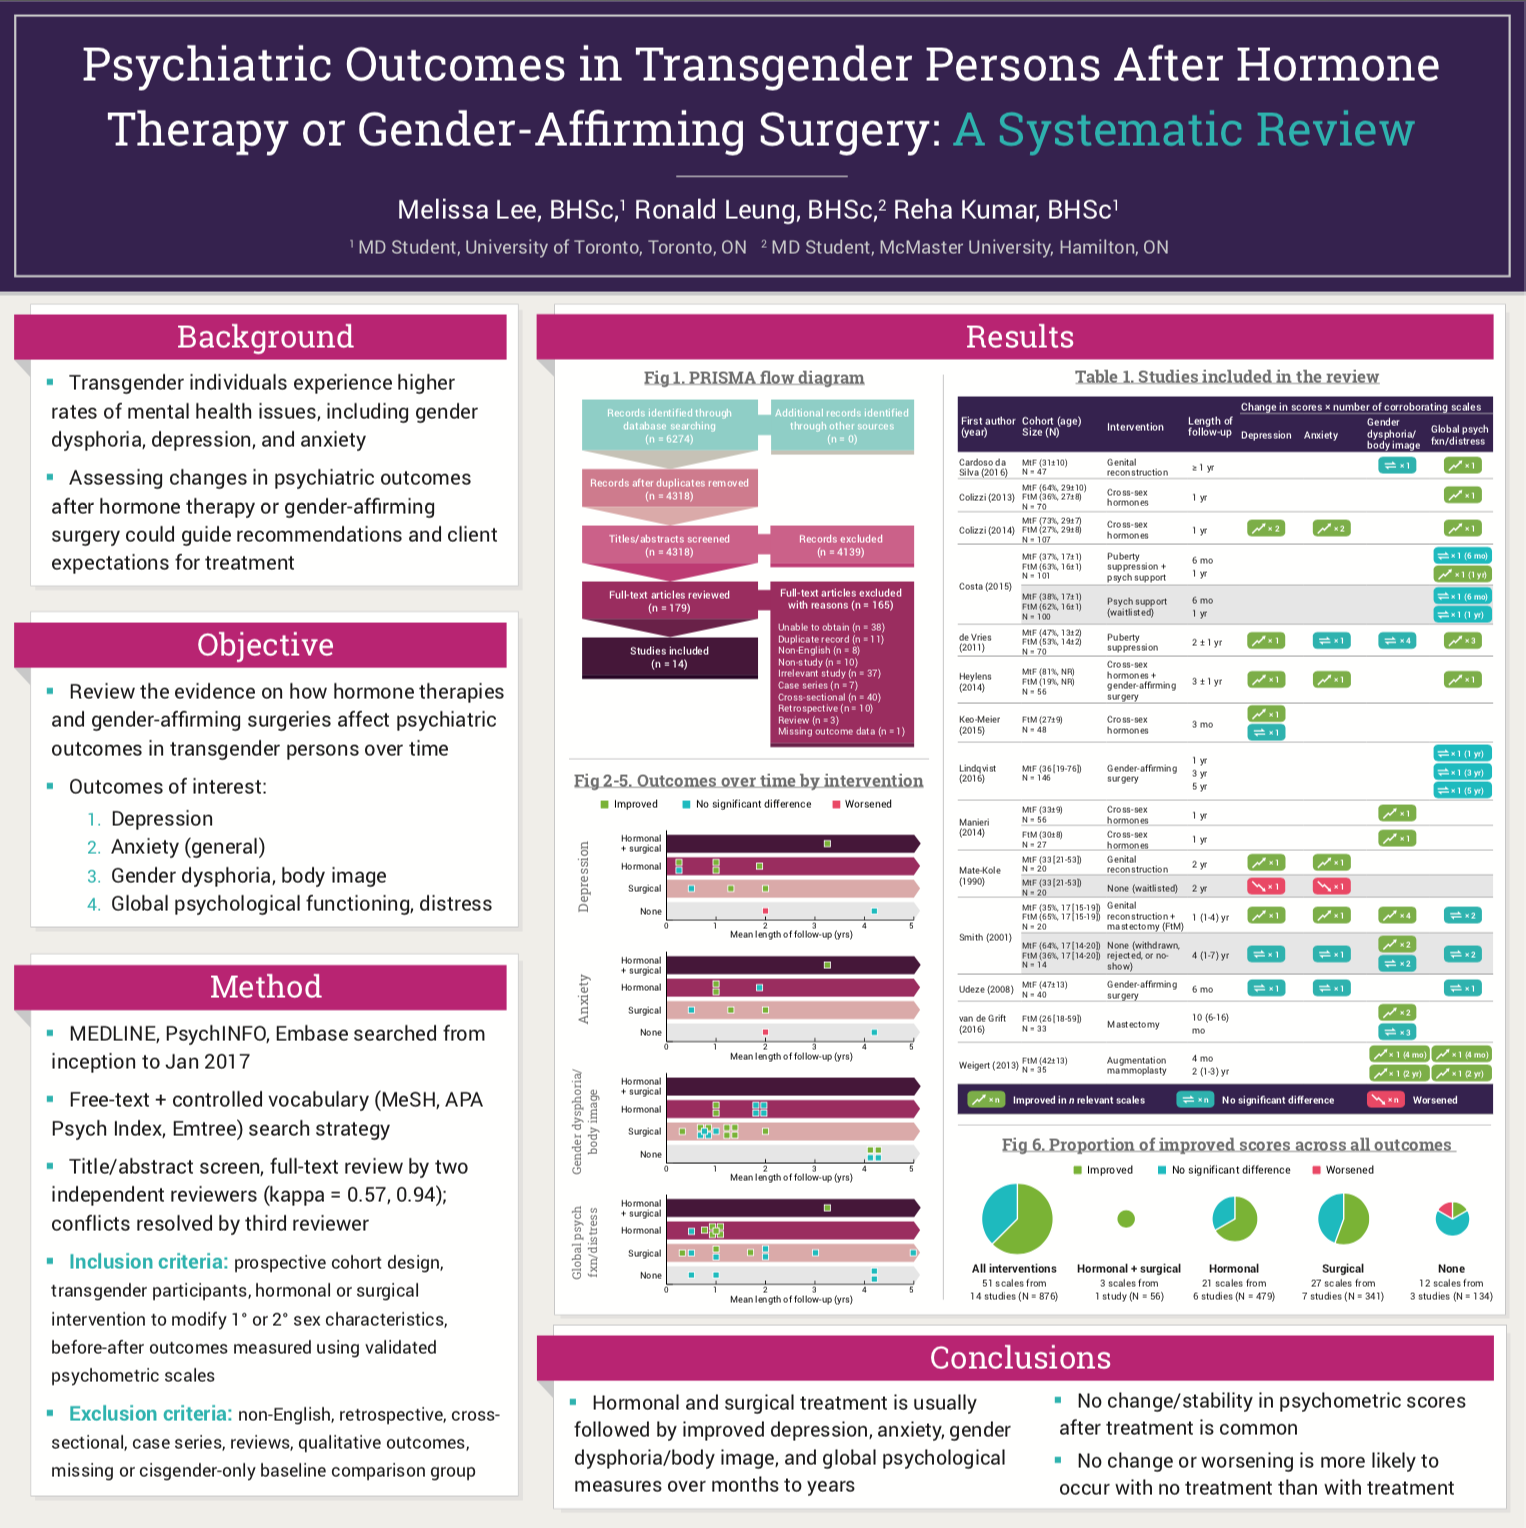 Psychatriac Outcomes in Transgender Persons After Hormone Therapy or Gender-Affirming Surgery: A Systematic Review; Melissa Lee; BHSc, Ronald Leung, BHSc; Reha Kumar, BHSc